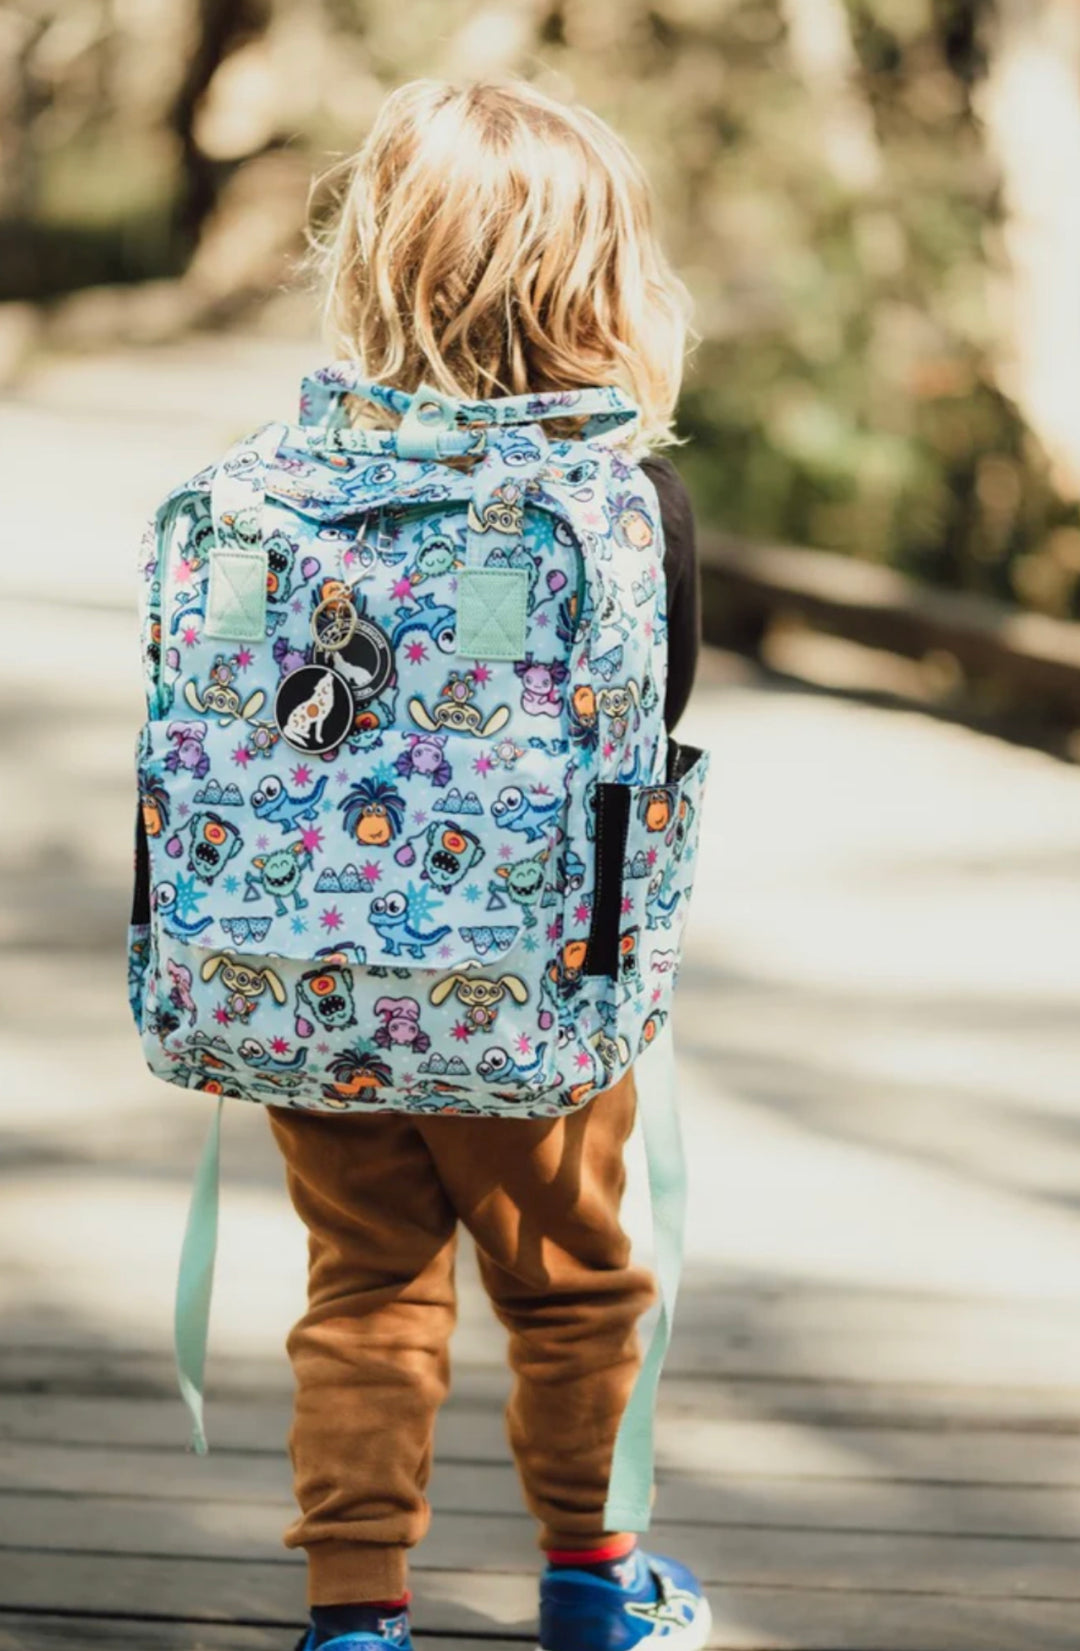 Wolfpack Kids' Backpack - Love at First Fright